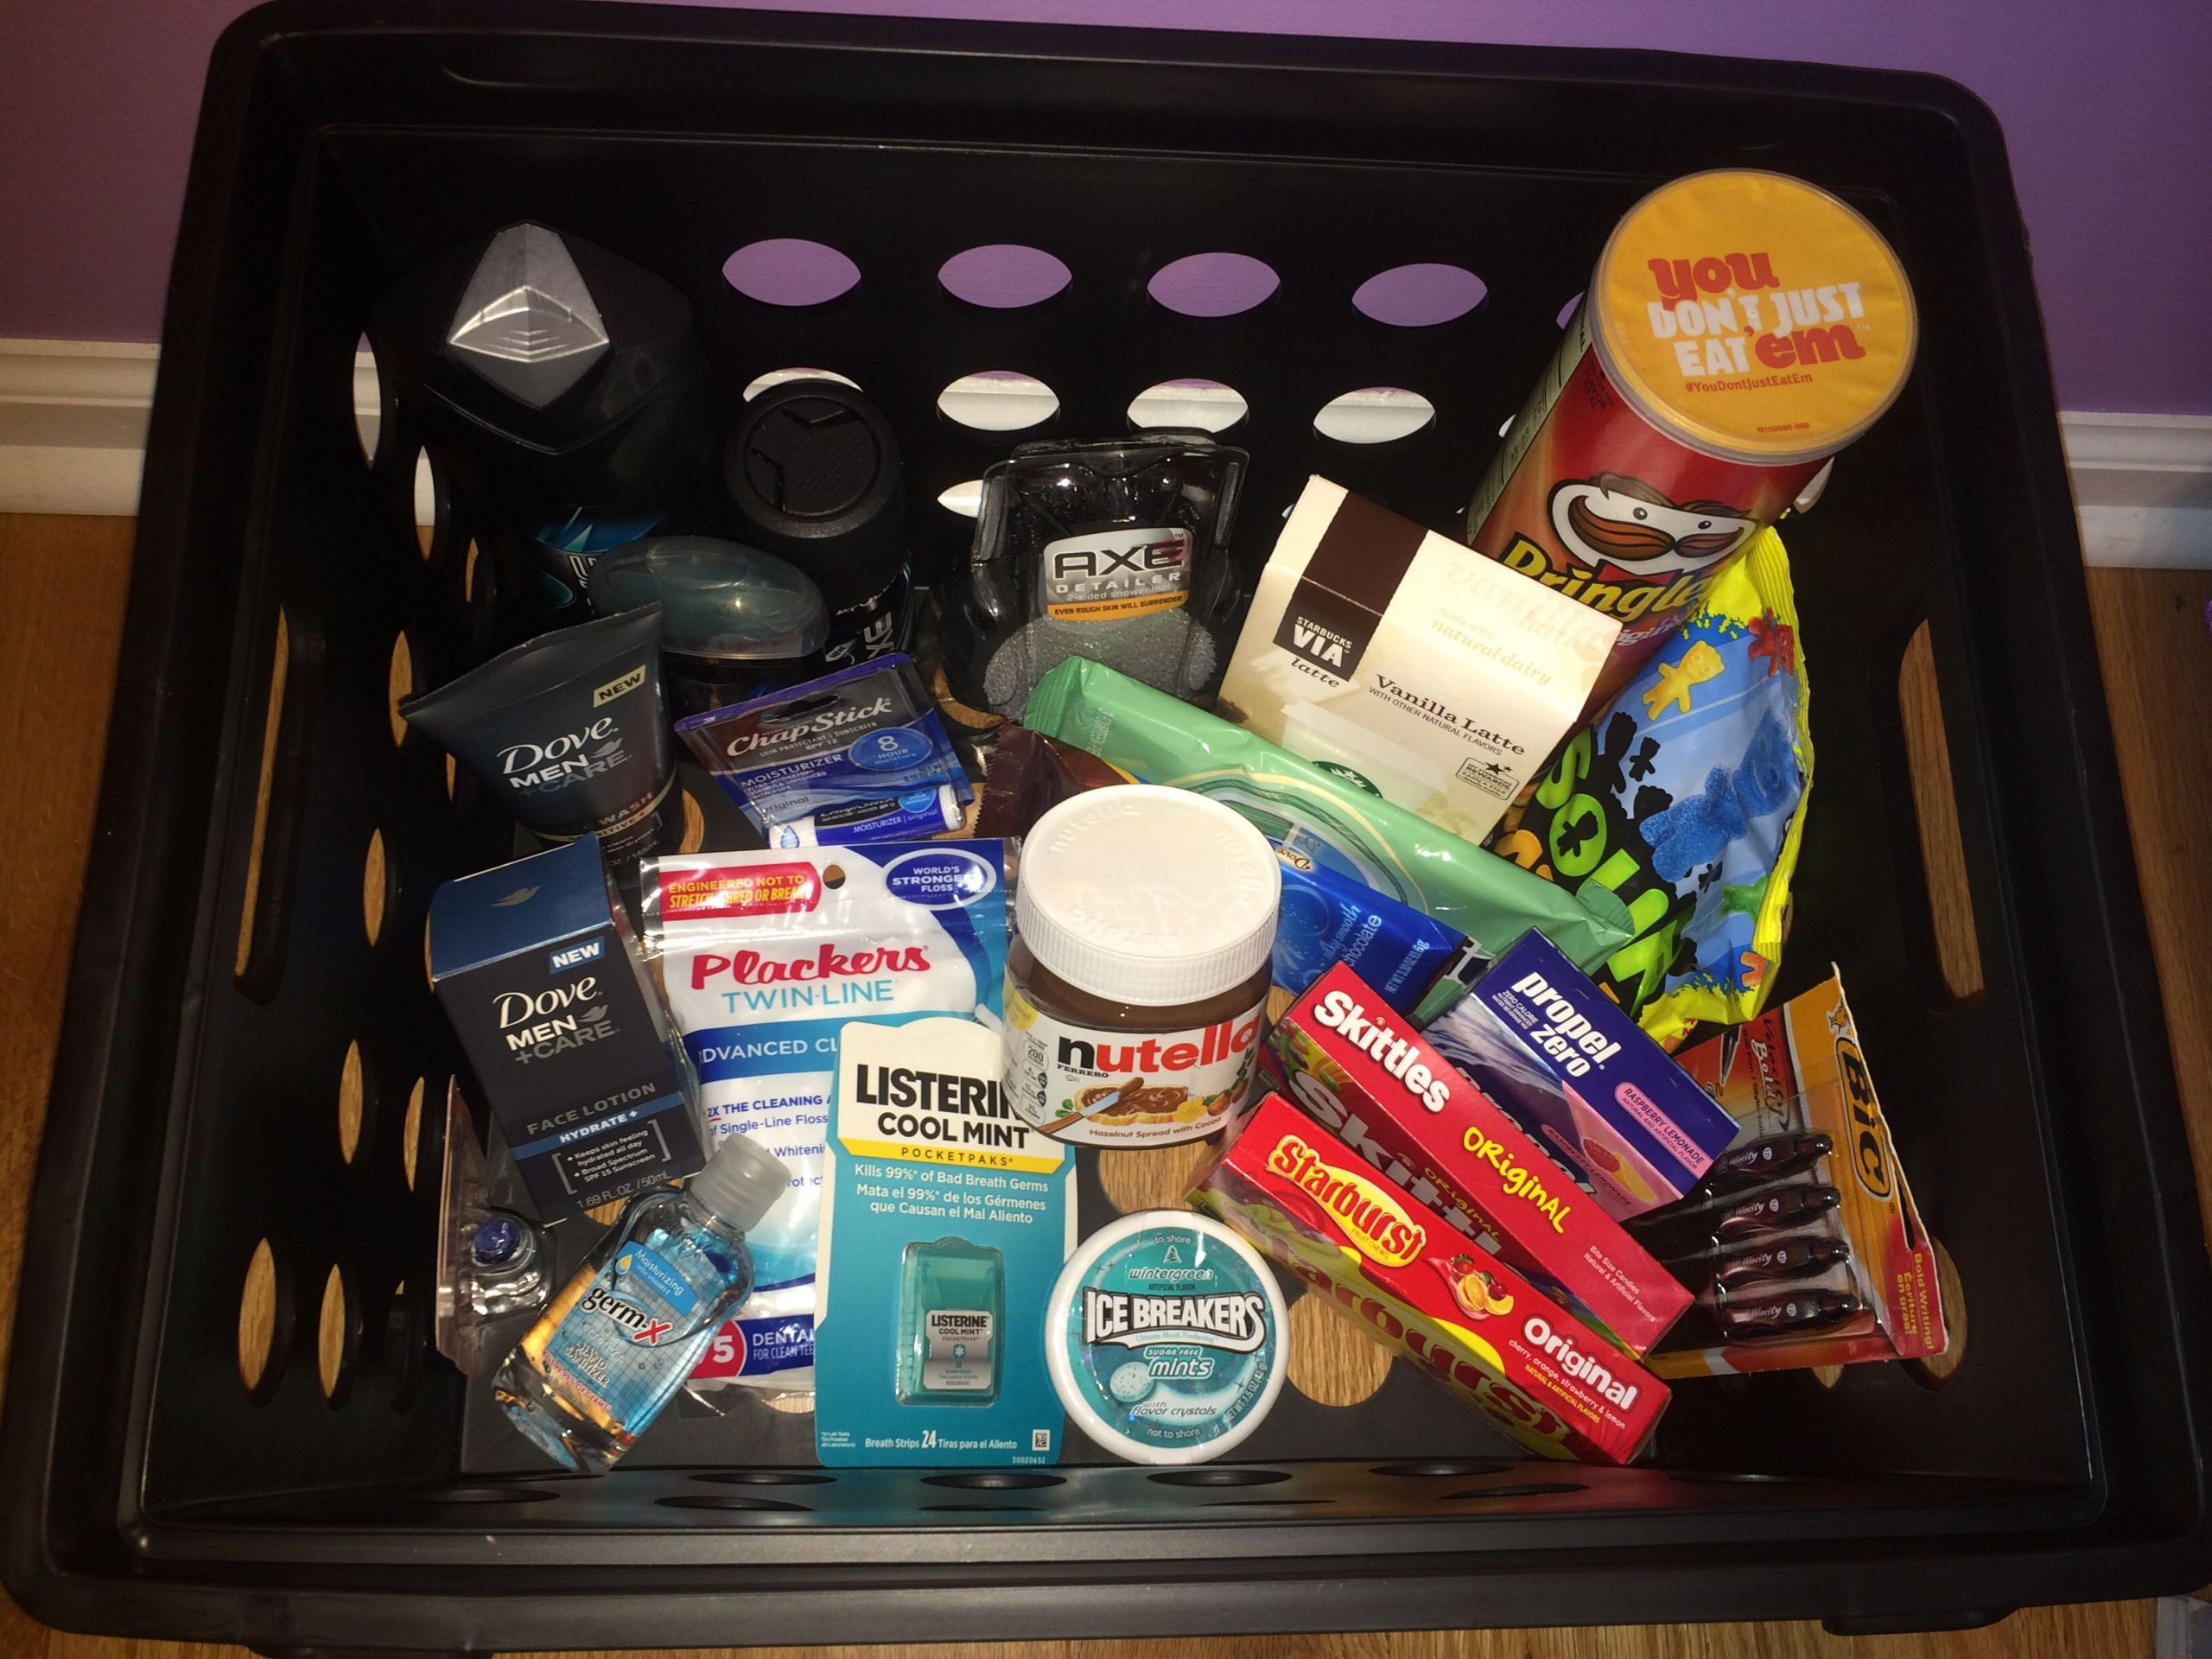 Off To College Gift Basket Ideas
 "Survival kit" idea for your boyfriend guy friend going